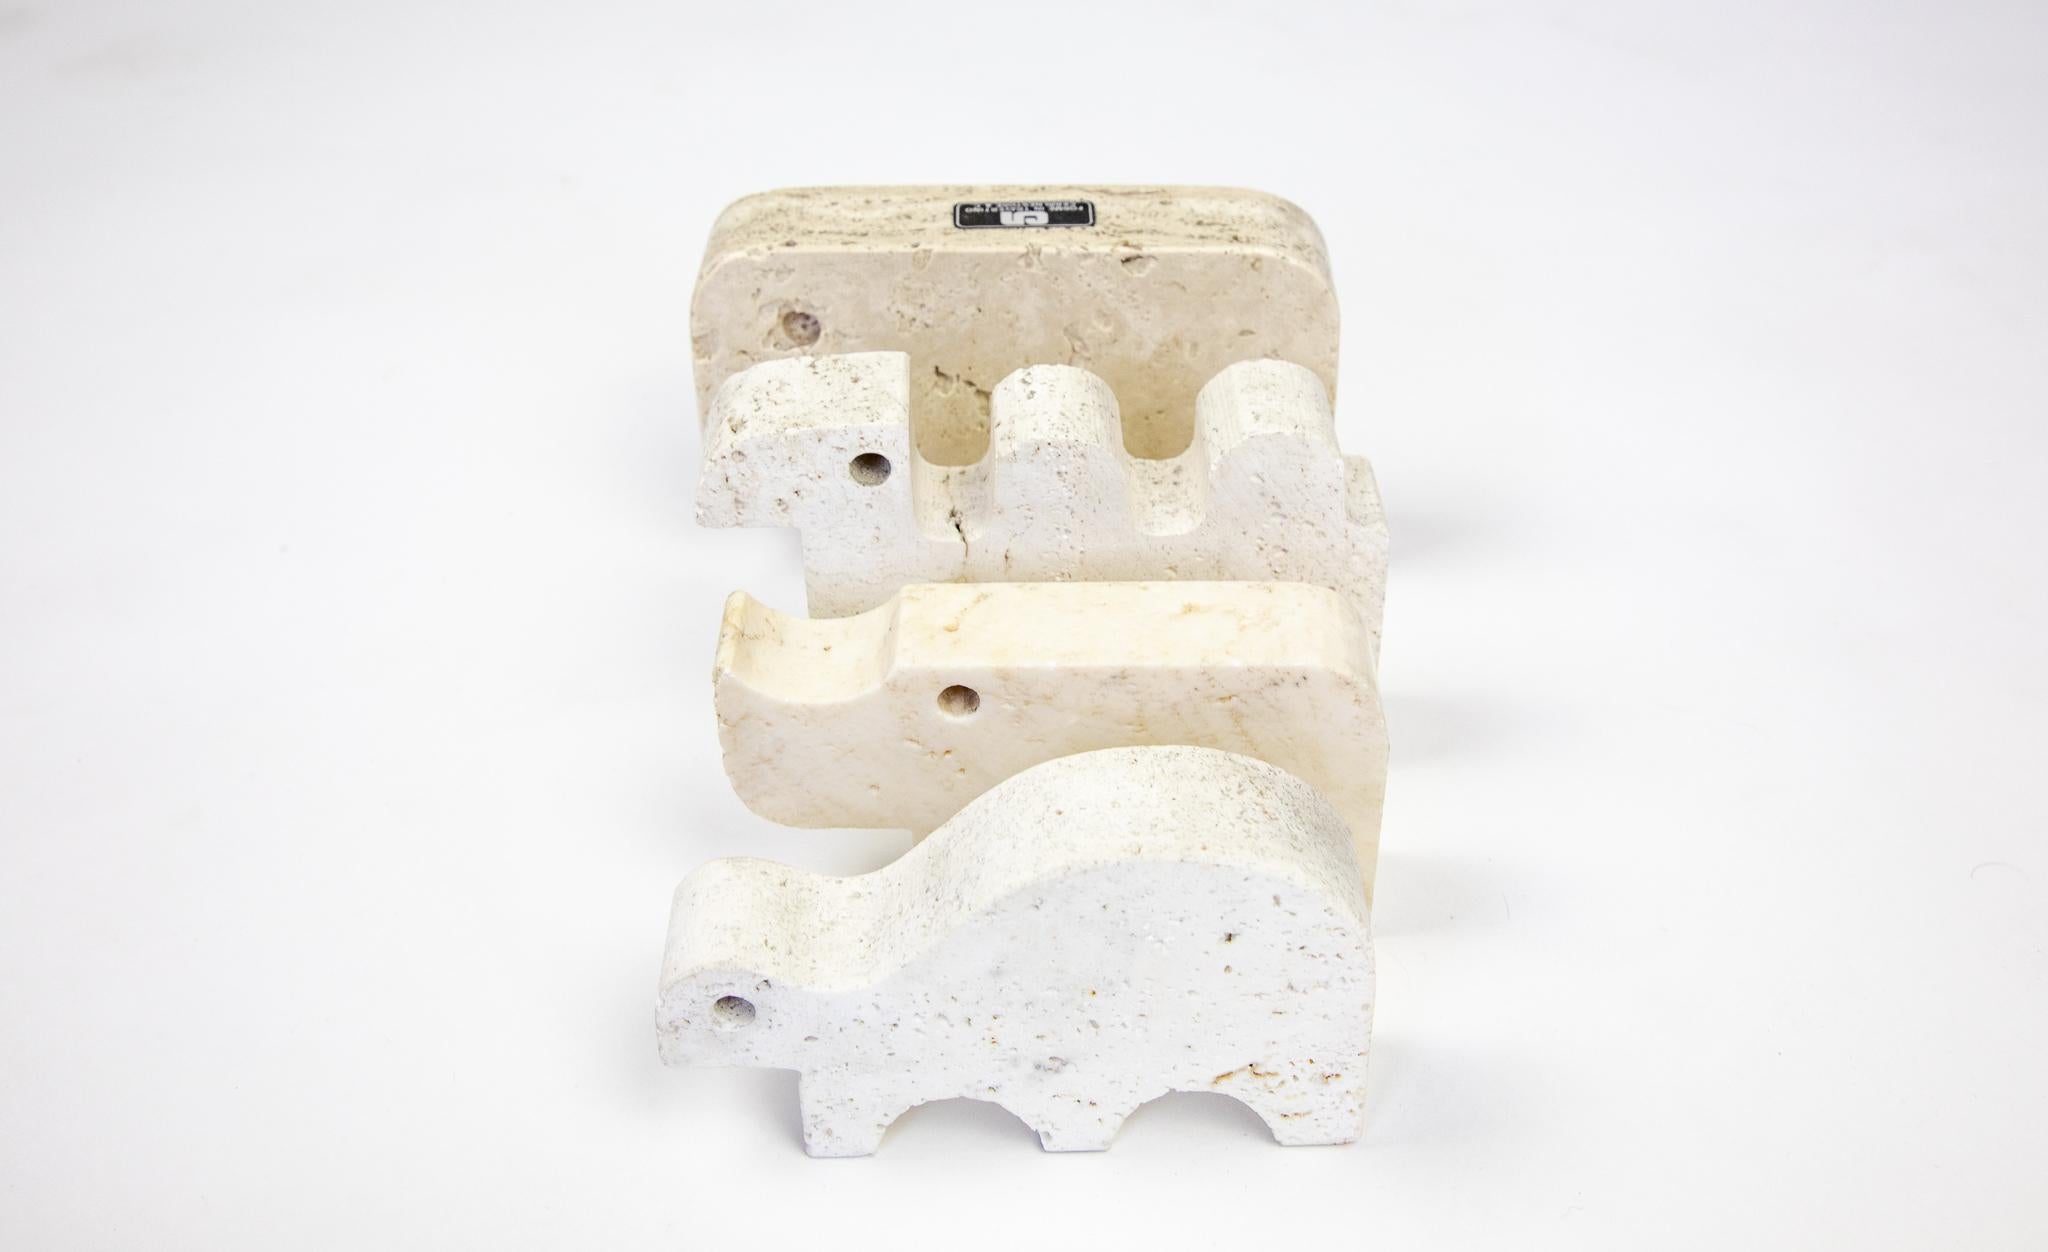 Mid-Century Moderntravertine animals sculptures in Brutalist style, Italy 1970s.

This lovely set of four travertine animal sculptures in brutalist style impresses with its minimalist form. Handmade from travertine stone in the 70s this set will